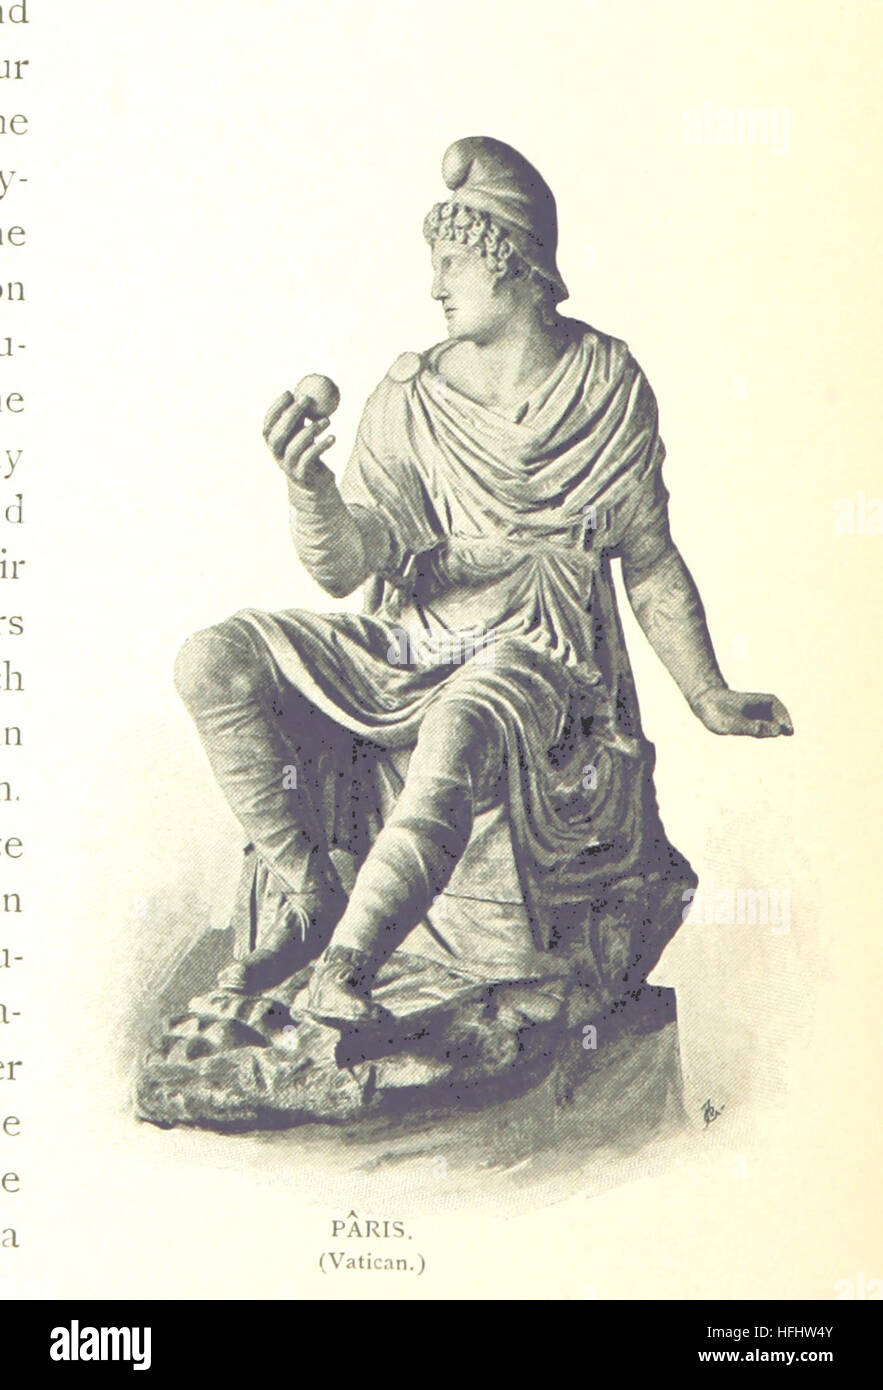 Image taken from page 184 of 'Rome ... Condensed and edited by Mrs. A. Bell ... With 290 illustrations, etc' Image taken from page 184 of 'Rome  Condensed and Stock Photo